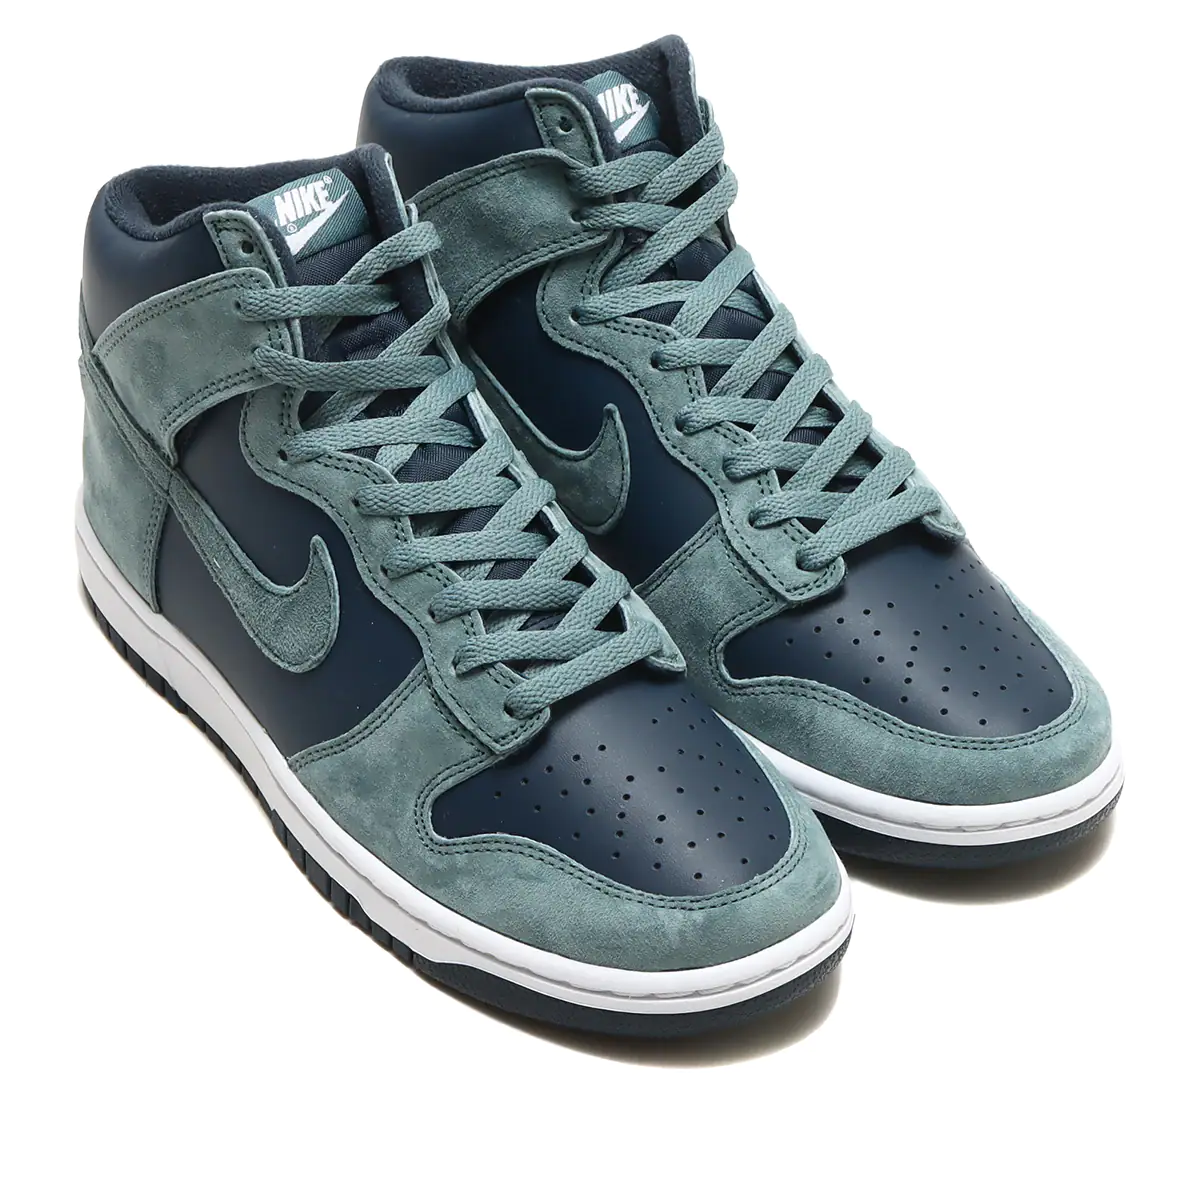 nike-dunk-high-armory-navy-mineral-slate-dq7679-400-release-20221207